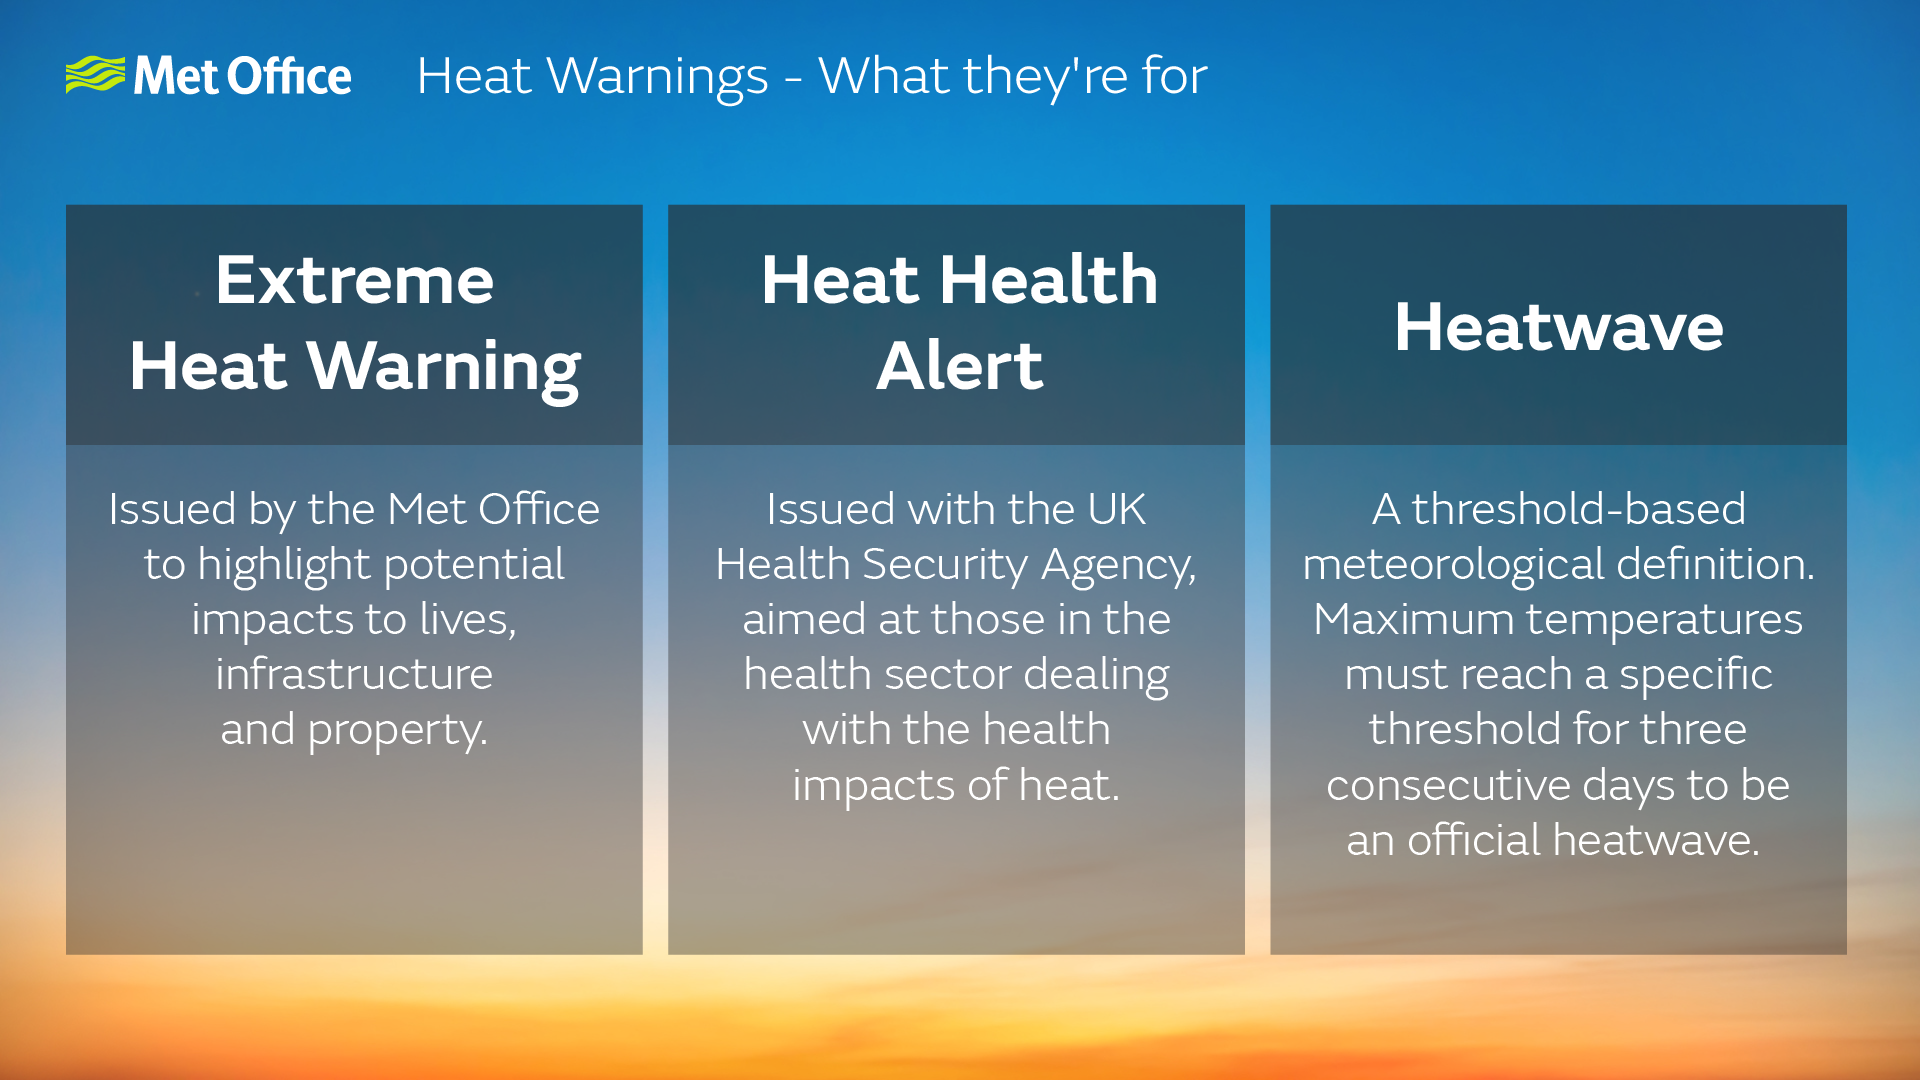 Met Office infographic showing 'Heat warnings - What they're for'. Extreme Heat Warning - issued by the Met Office to highlight potential impacts to lives, infrastructure and property. Heat Health Alert - Issued with the UK Health Security Agency, aimed at those in the health sector dealing with the health impacts of heat. Heatwave - A threshold-based meteorological definition. Maximum temperatures must reach a specific threshold for three consecutive days to be an official heatwave.